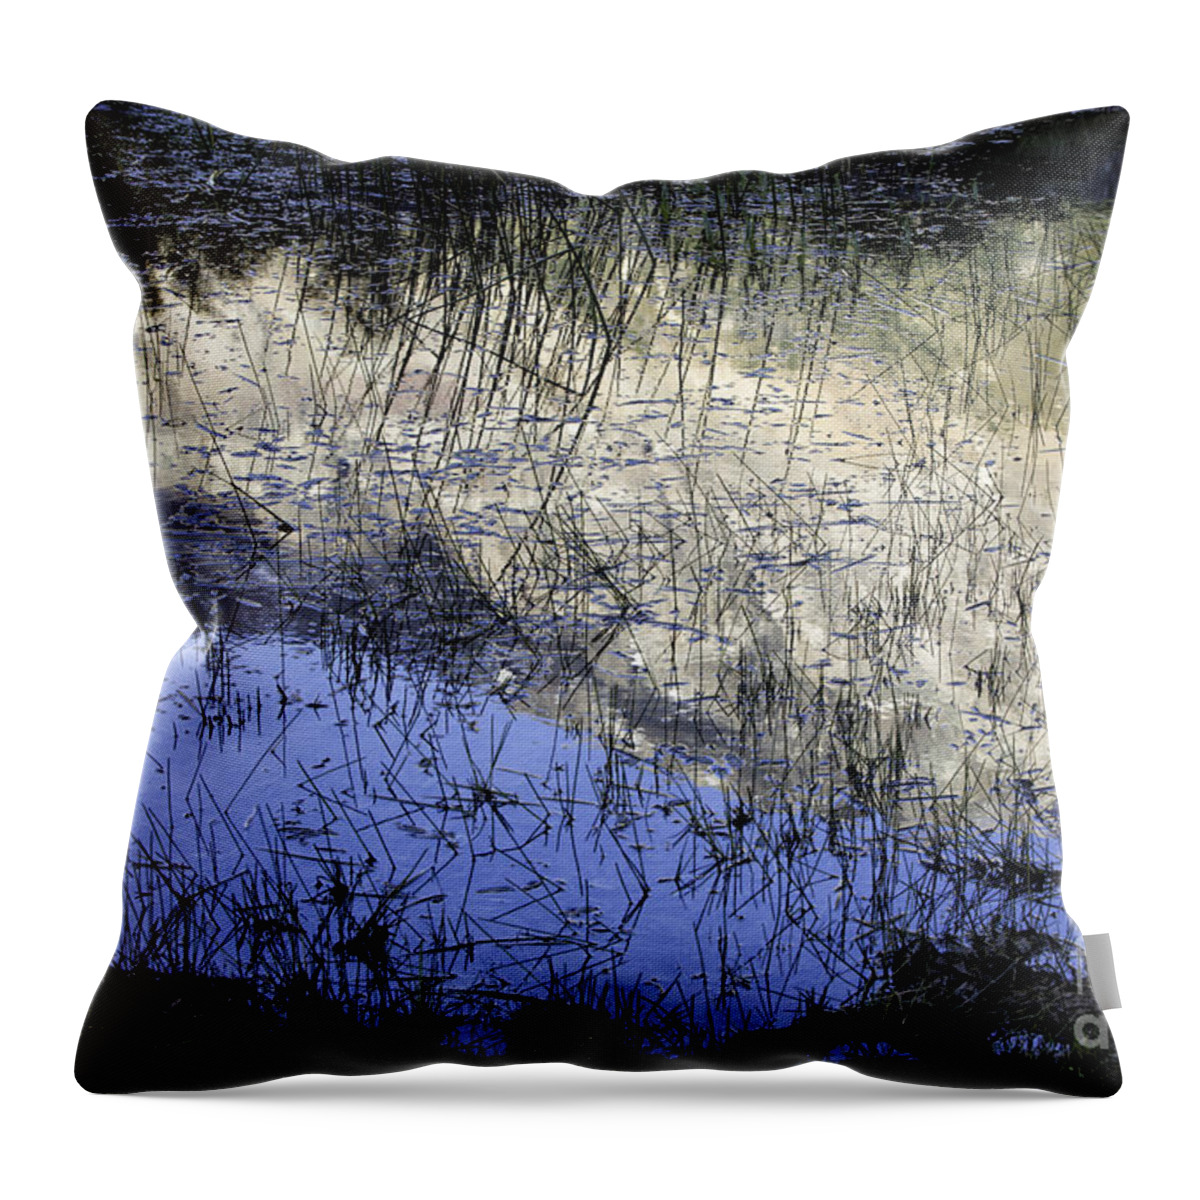 Patagonia Throw Pillow featuring the photograph Mountain In A Pond 1 by Timothy Hacker